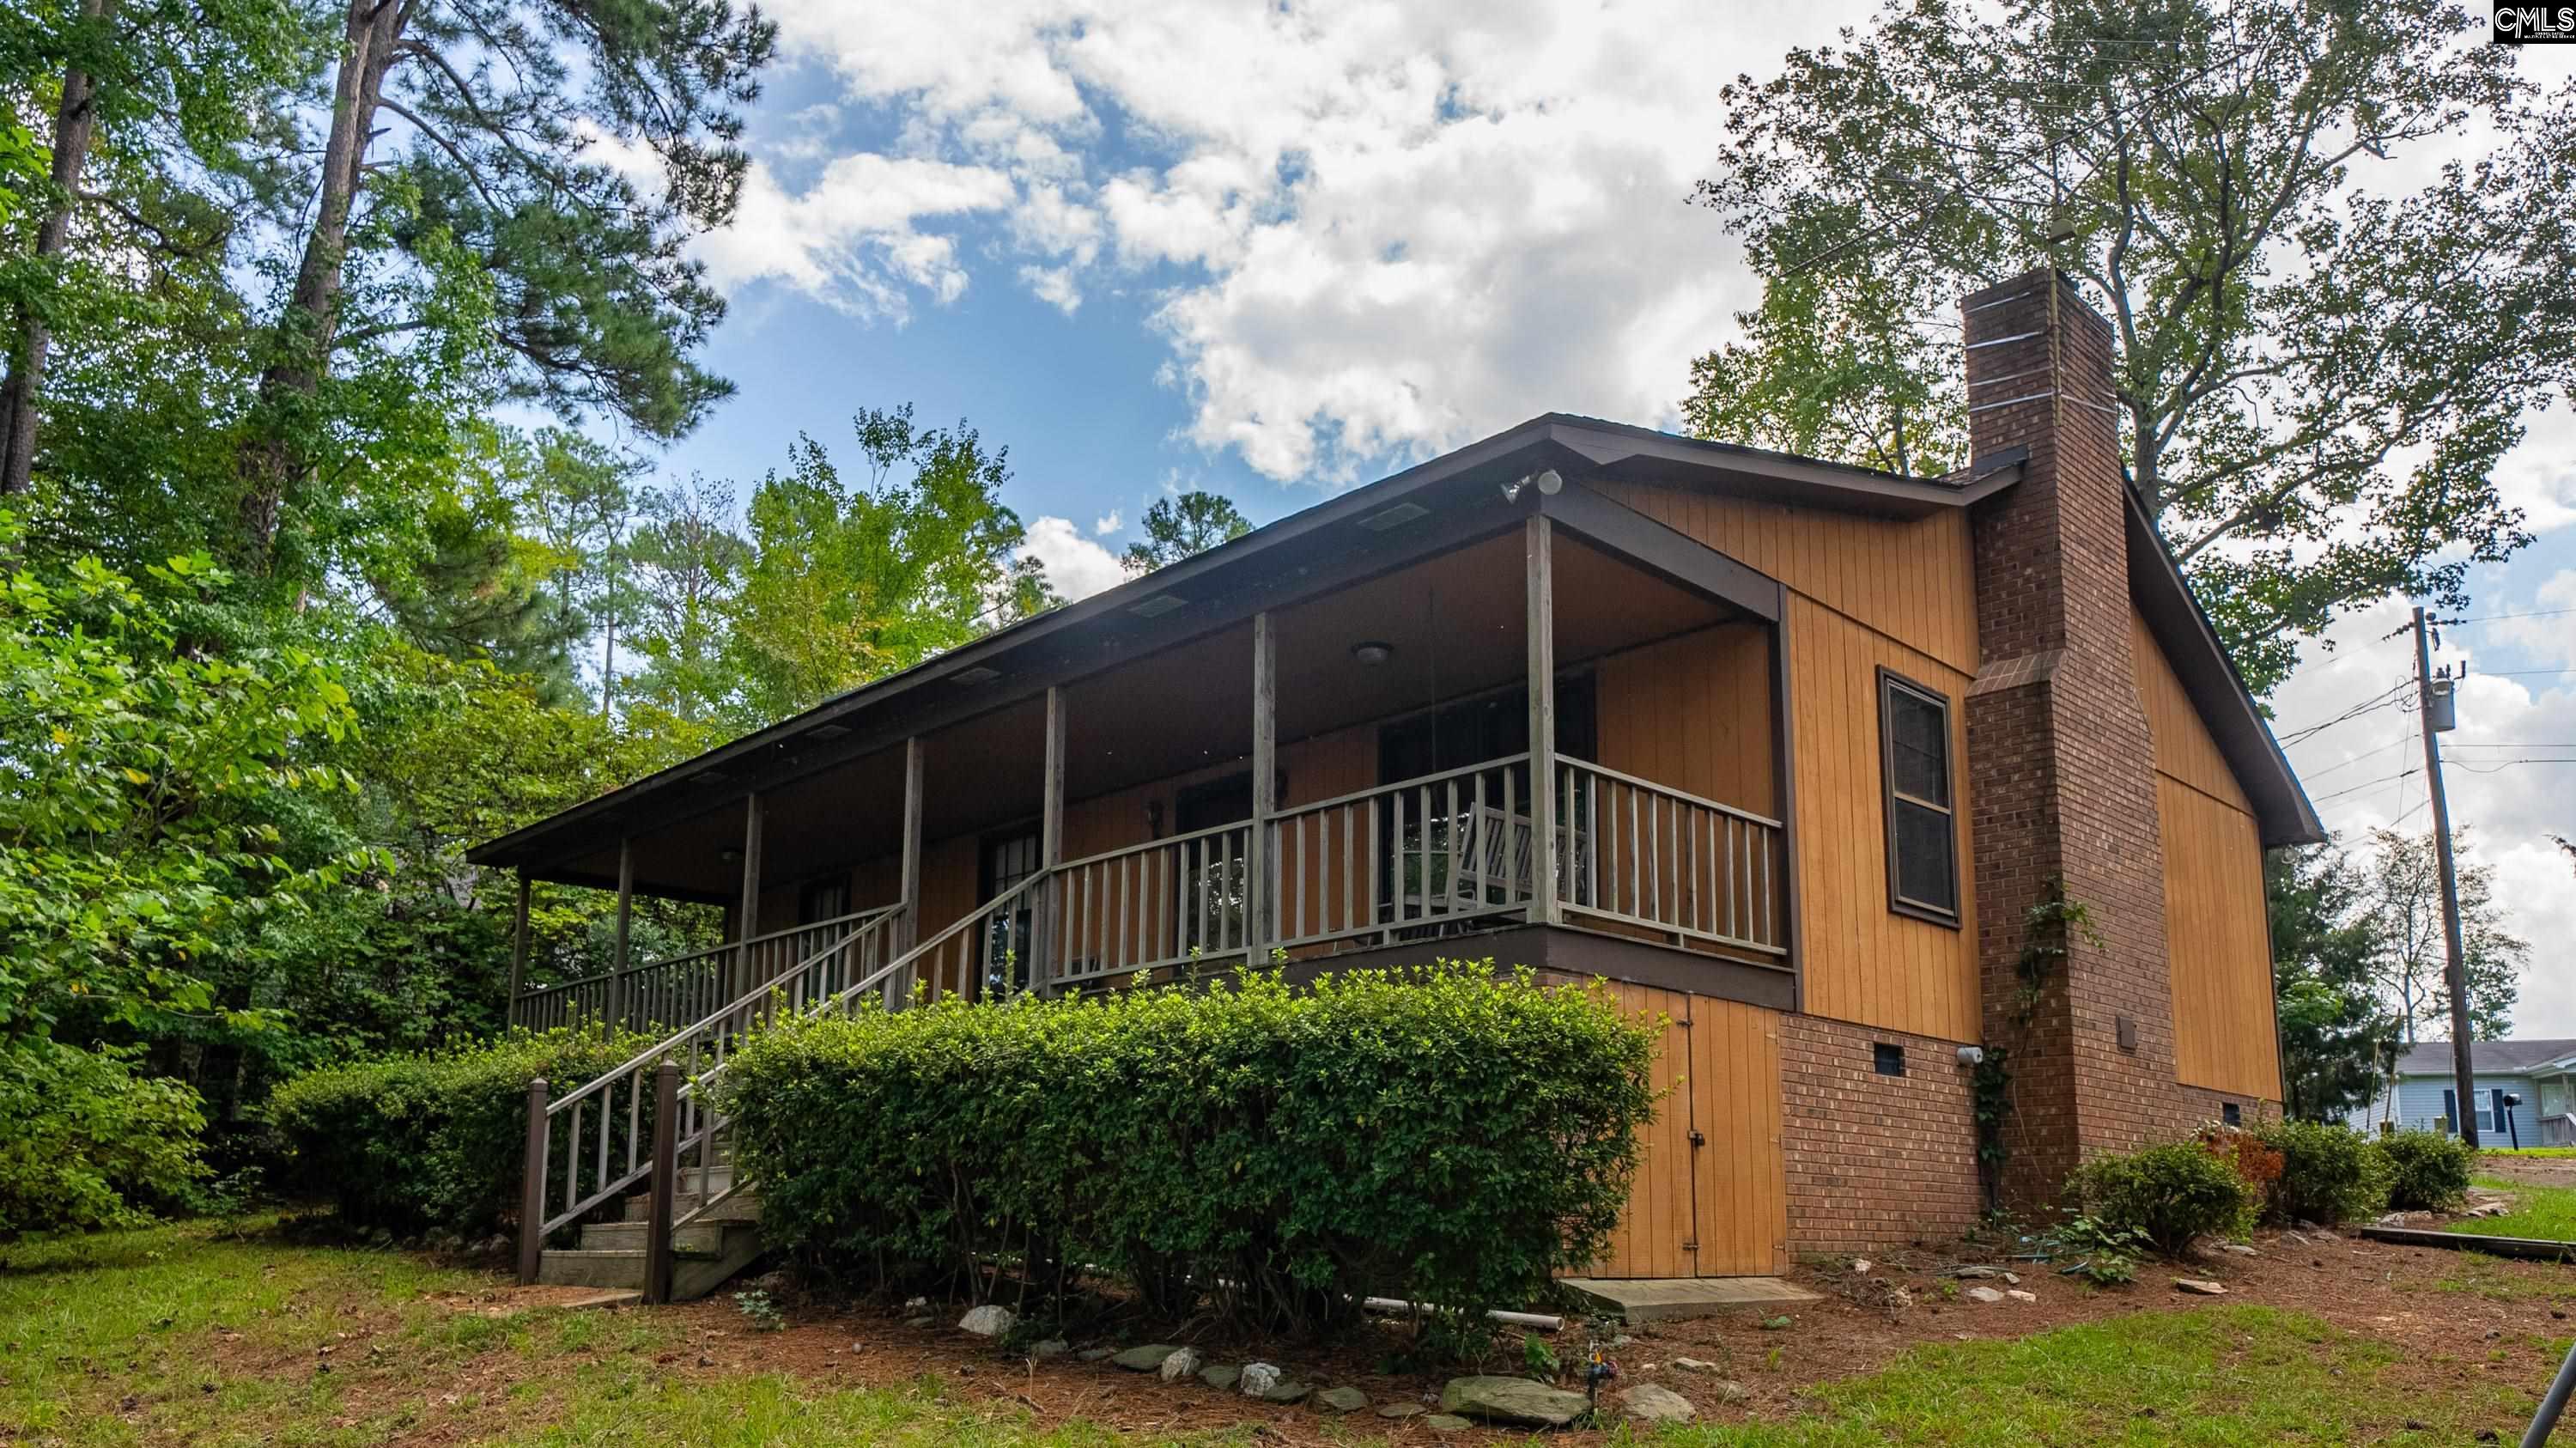 4452 HOLLEY FERRY Road, Leesville, SC 29070 Listing Photo 7